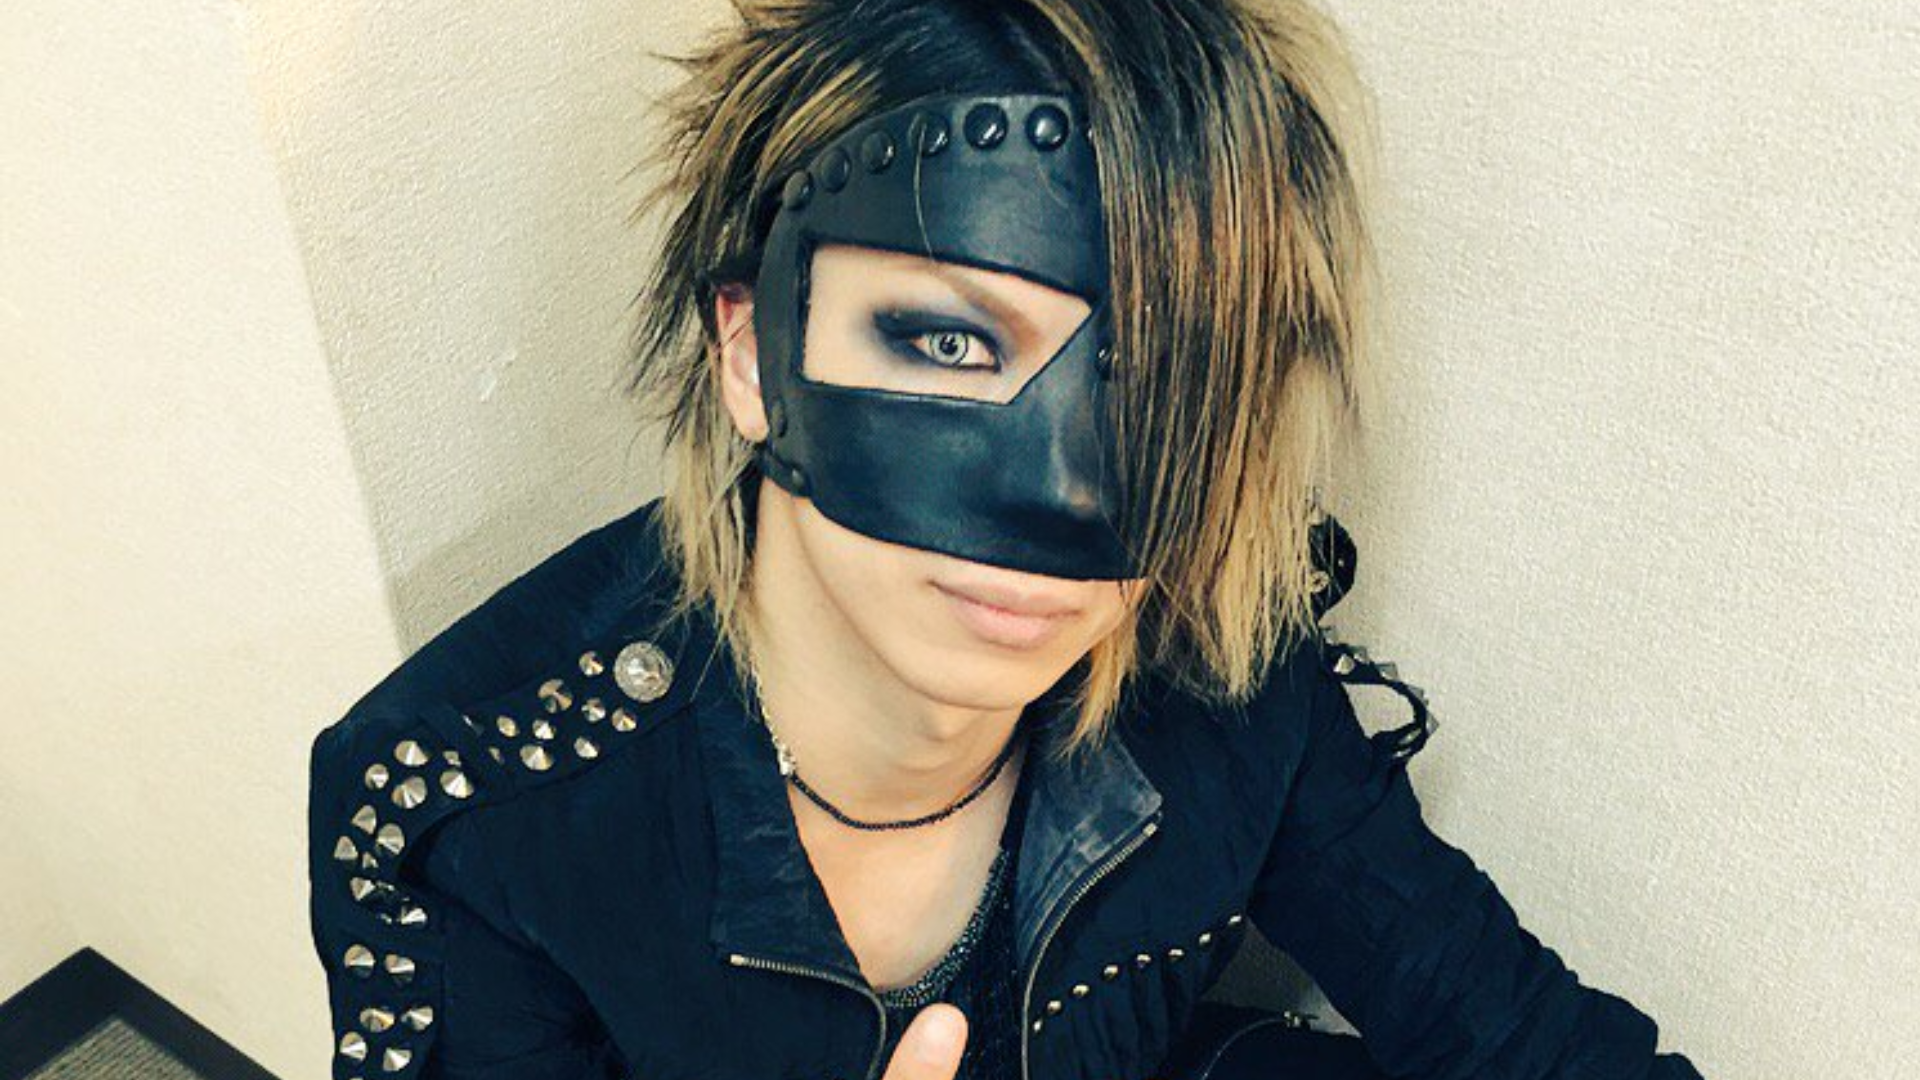 <p>Fans of Japanese rock have sad news to wake up to, as Reita from one of Japan’s biggest J-rock bands, ‘The Gazette', has been reported by Tokyo Weekender to have passed on April 15.</p> <p>Image: gazette05Reita / X</p>